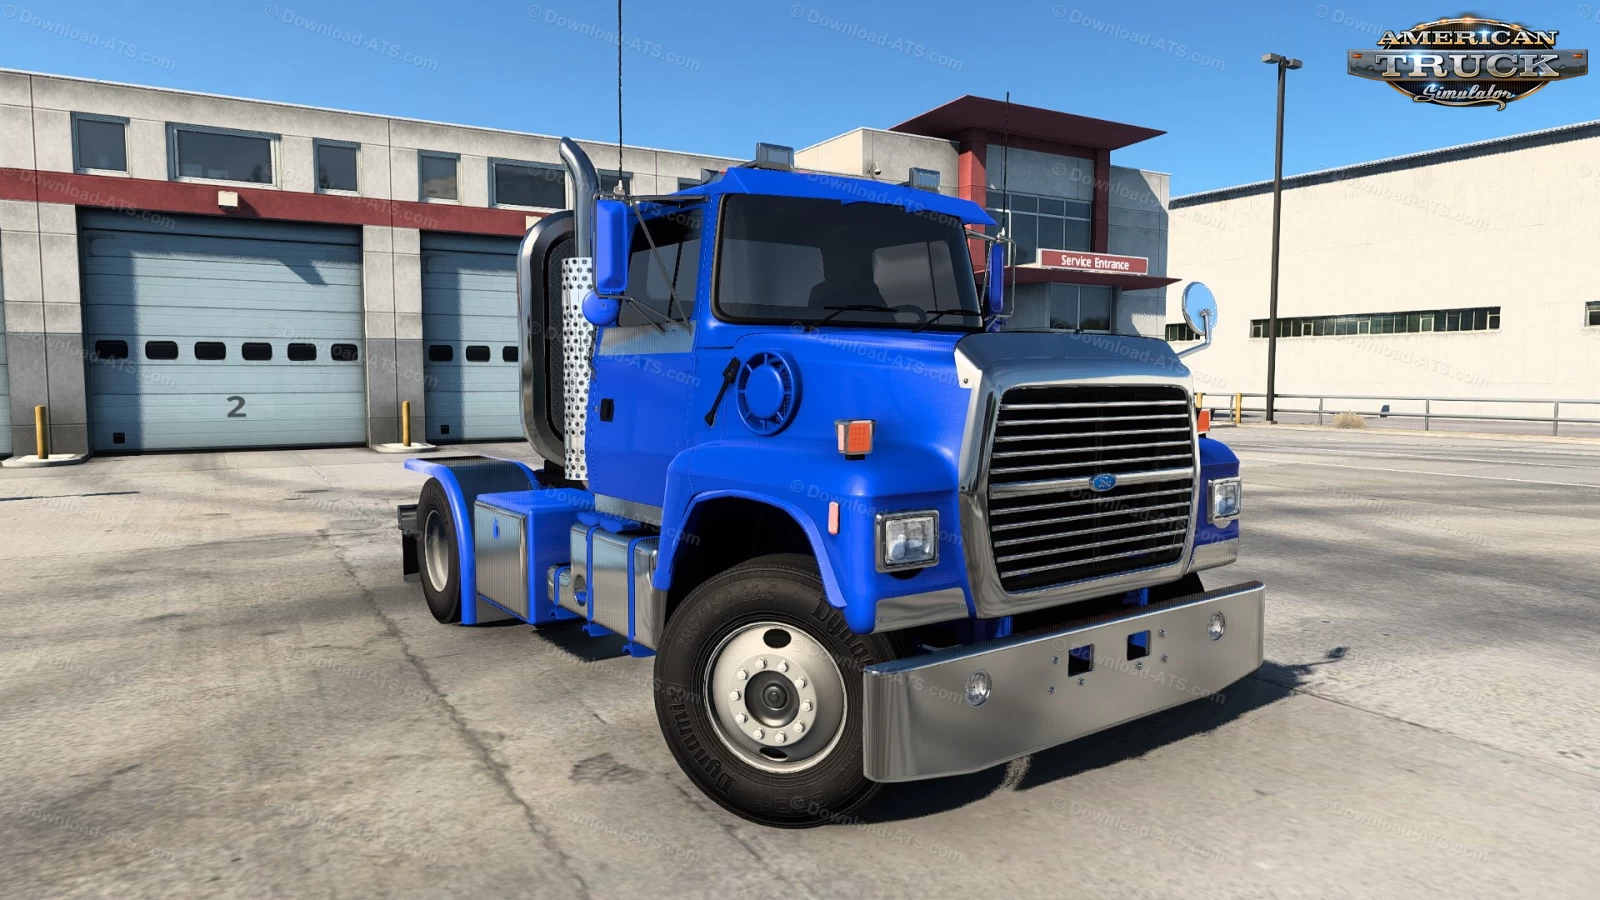 Ford L-Series Custom v1.4 by ReneNate (1.45.x) for ATS